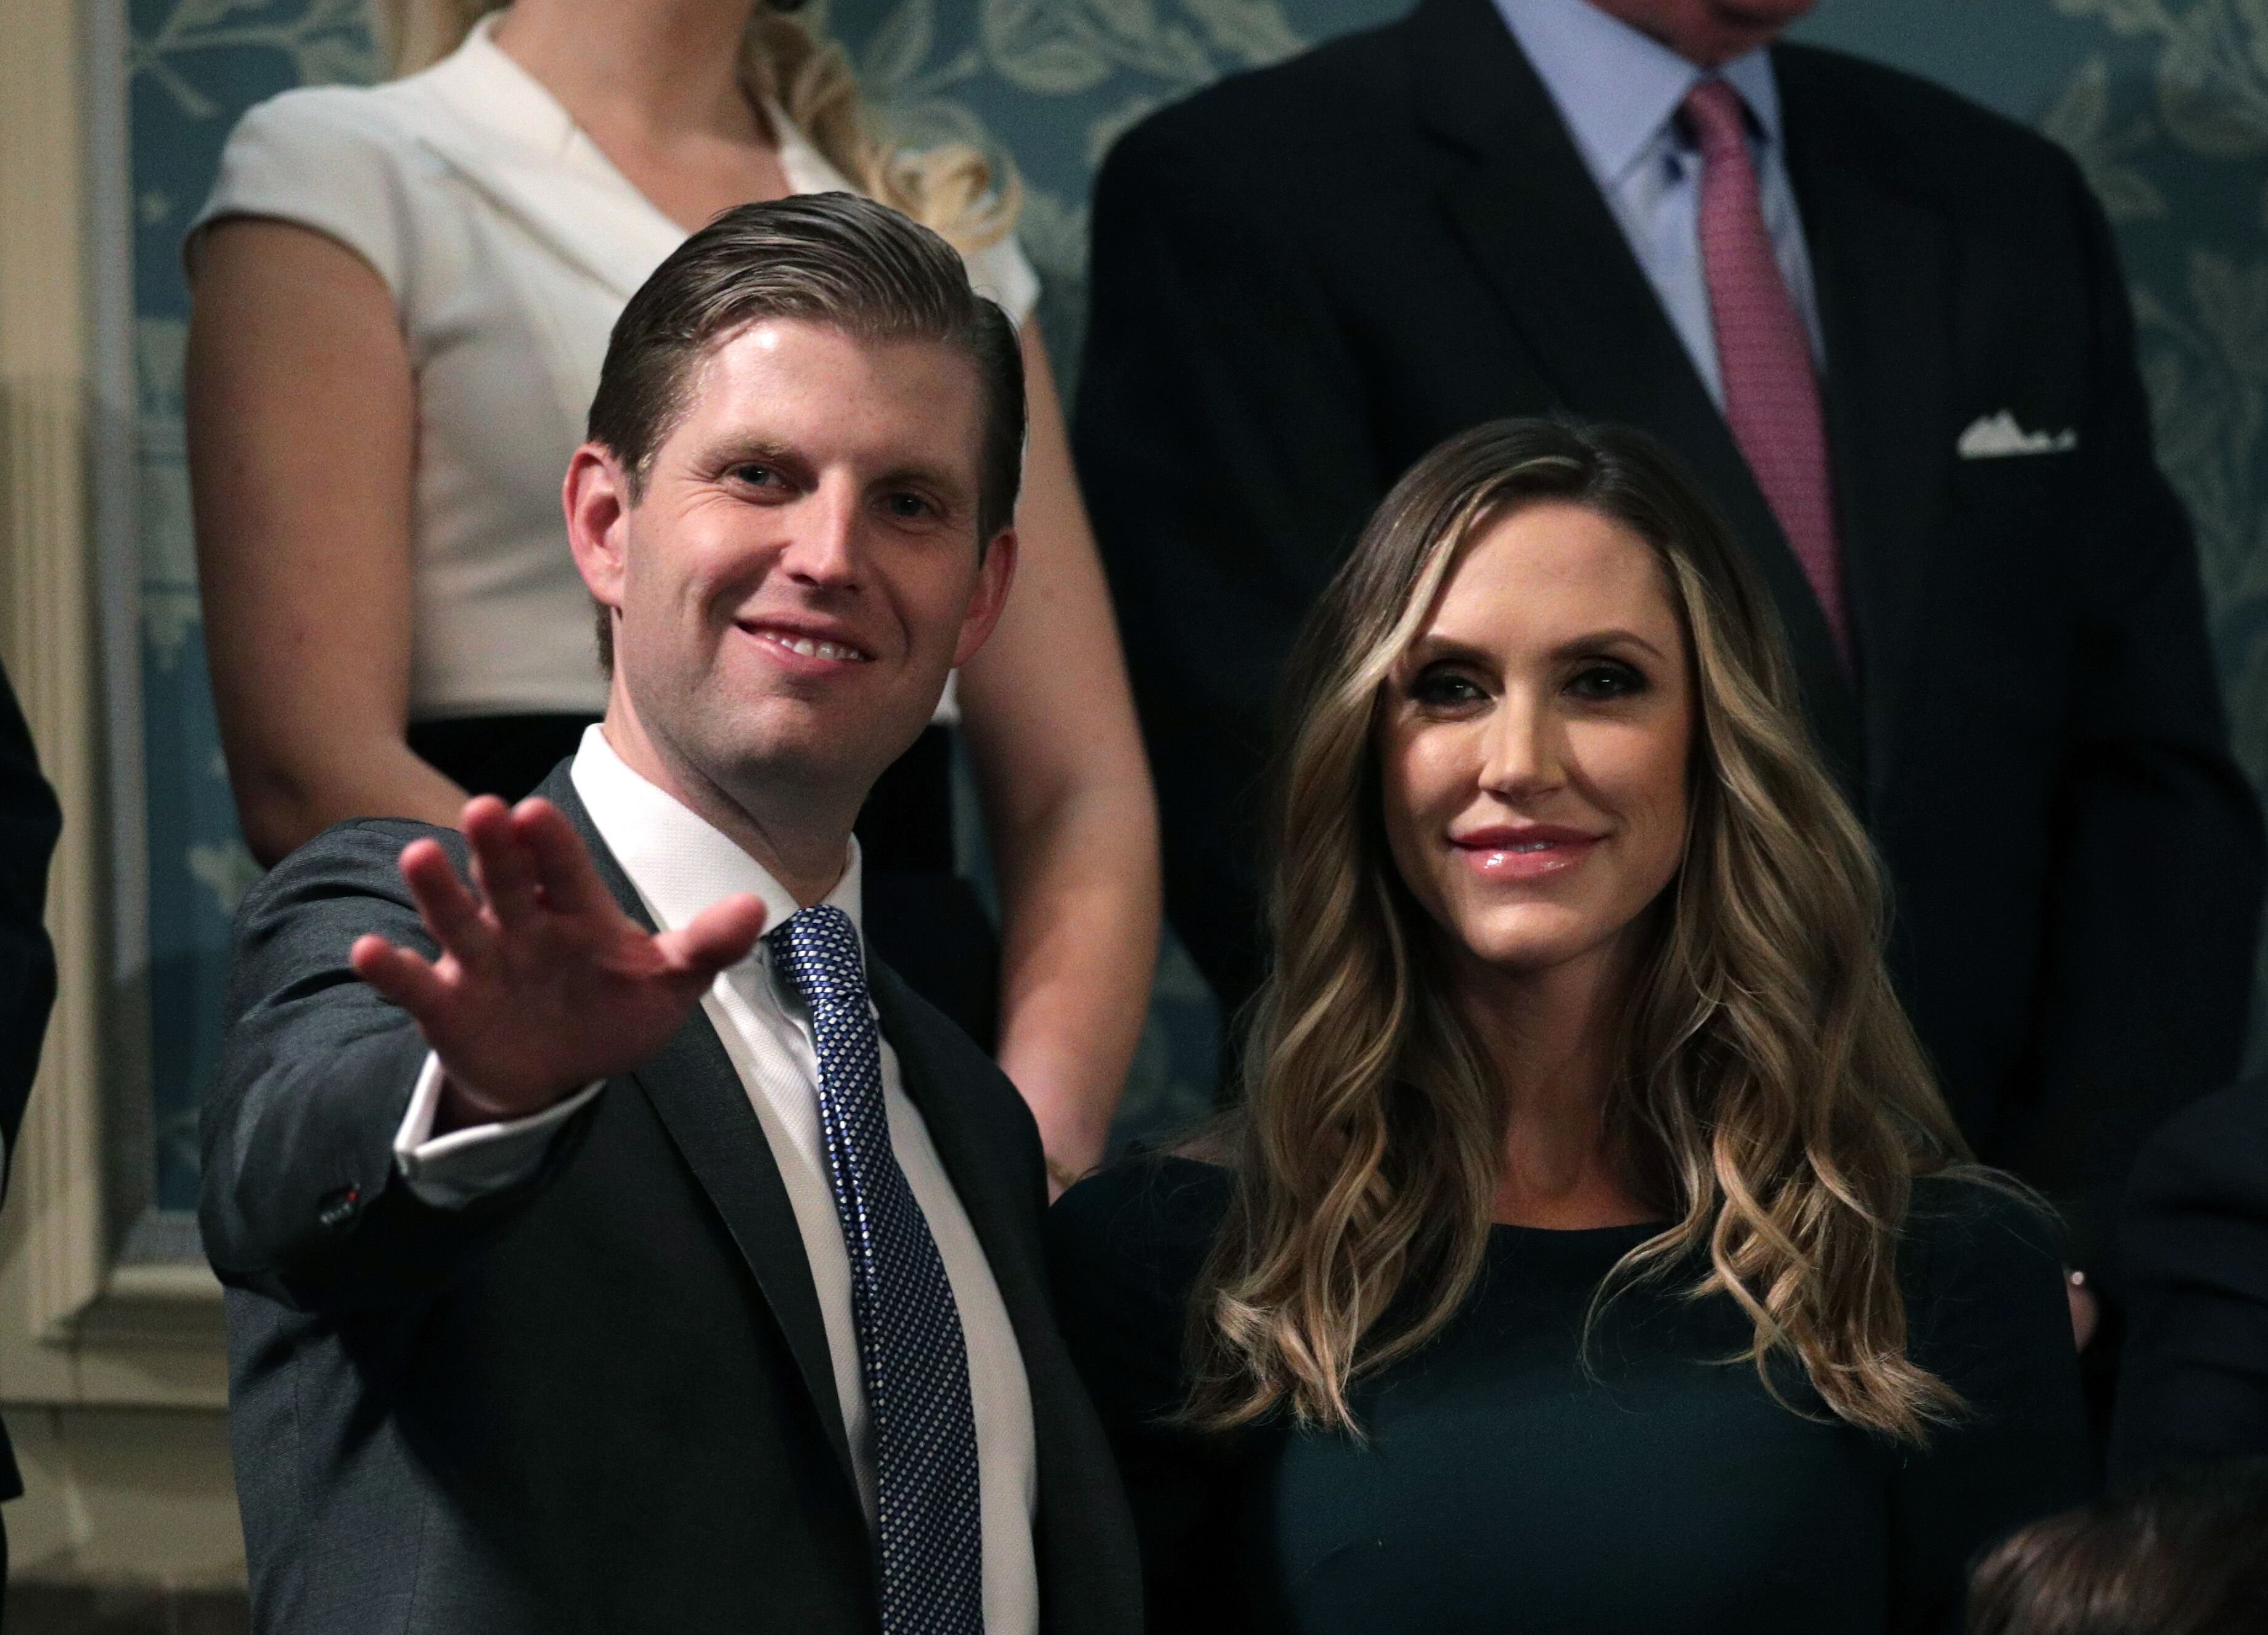 Eric Trump and Lara Trump attend the State of the Union address in the chamber of the U.S. House of Representatives January 30, 2018 in Washington, DC